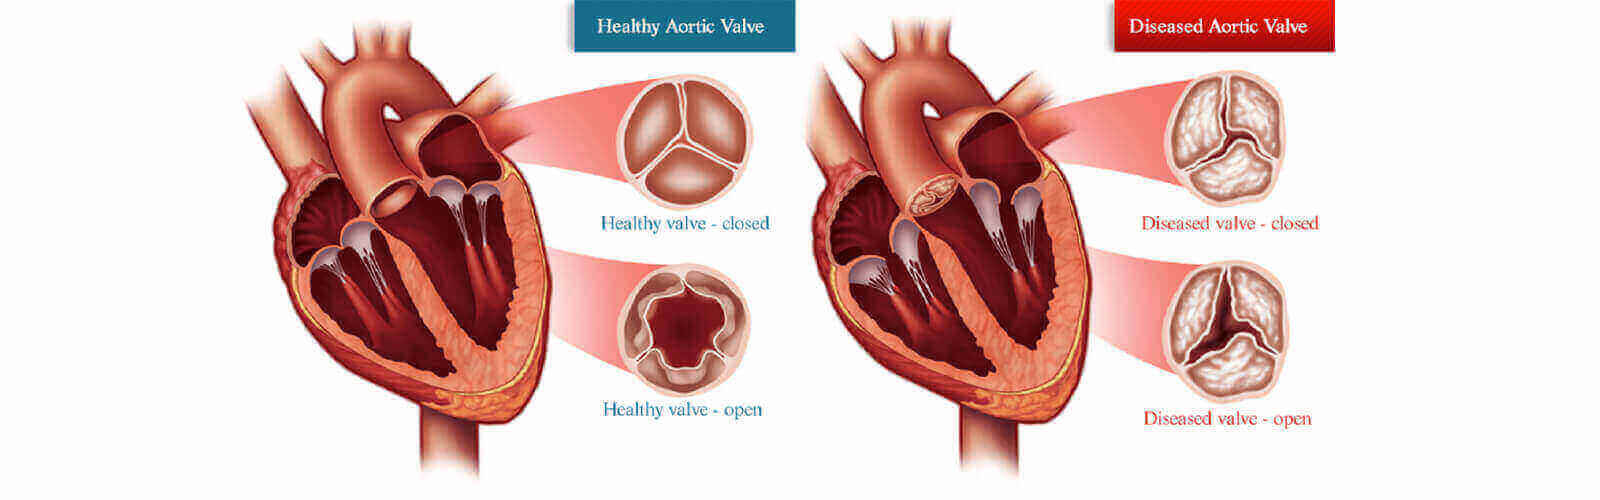 Heart Valve Replacement Surgery in Abu Dhabi